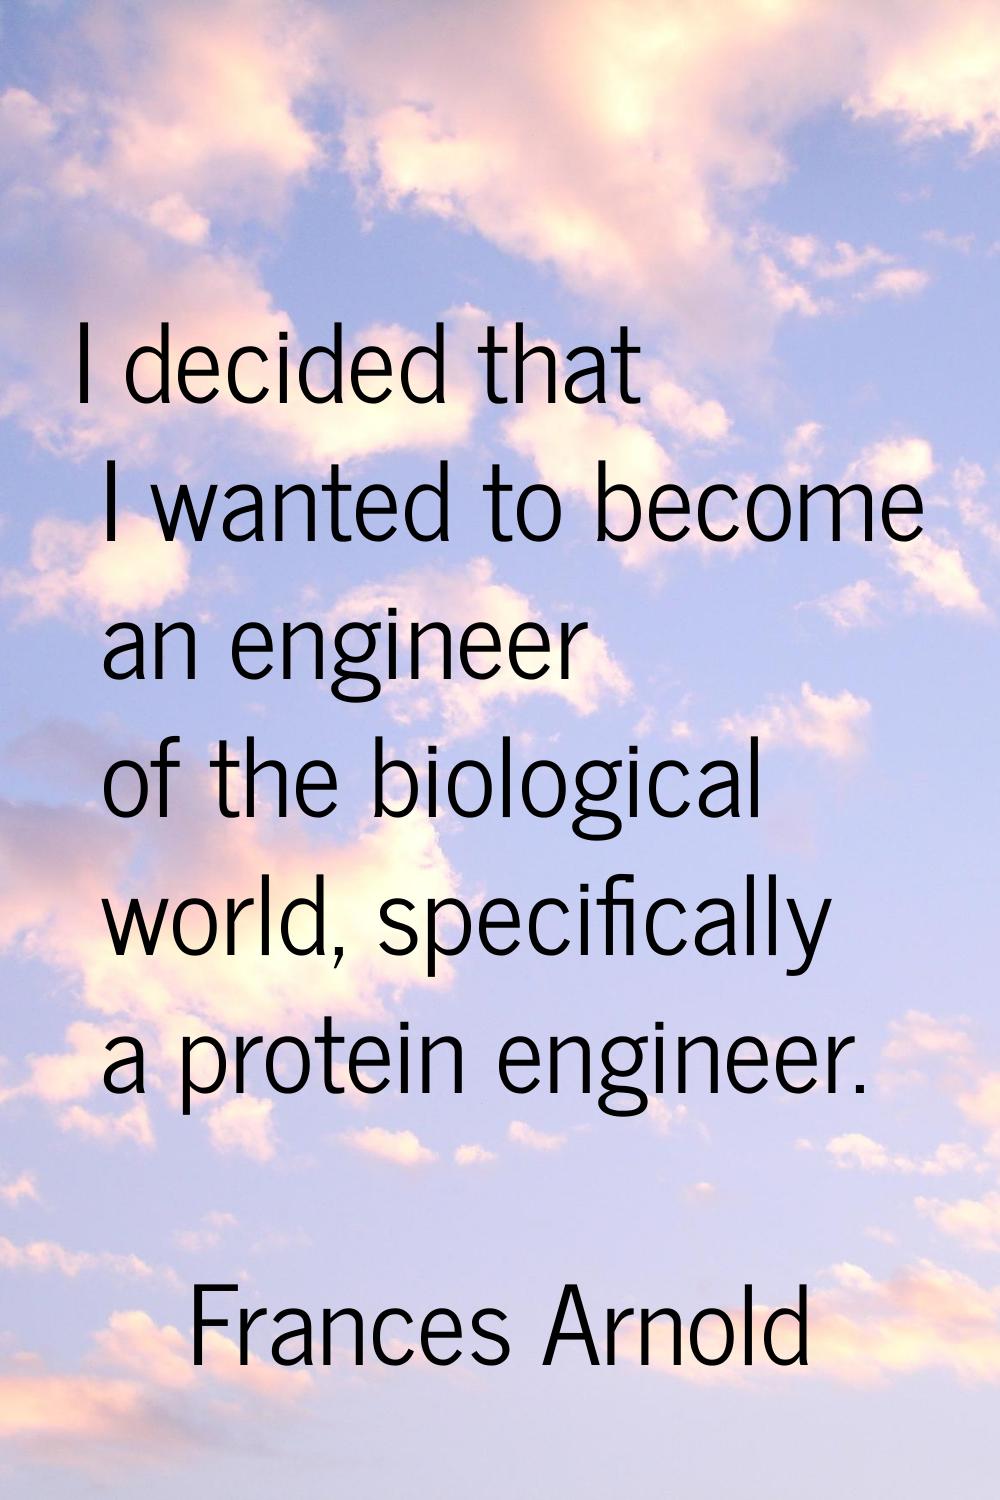 I decided that I wanted to become an engineer of the biological world, specifically a protein engin